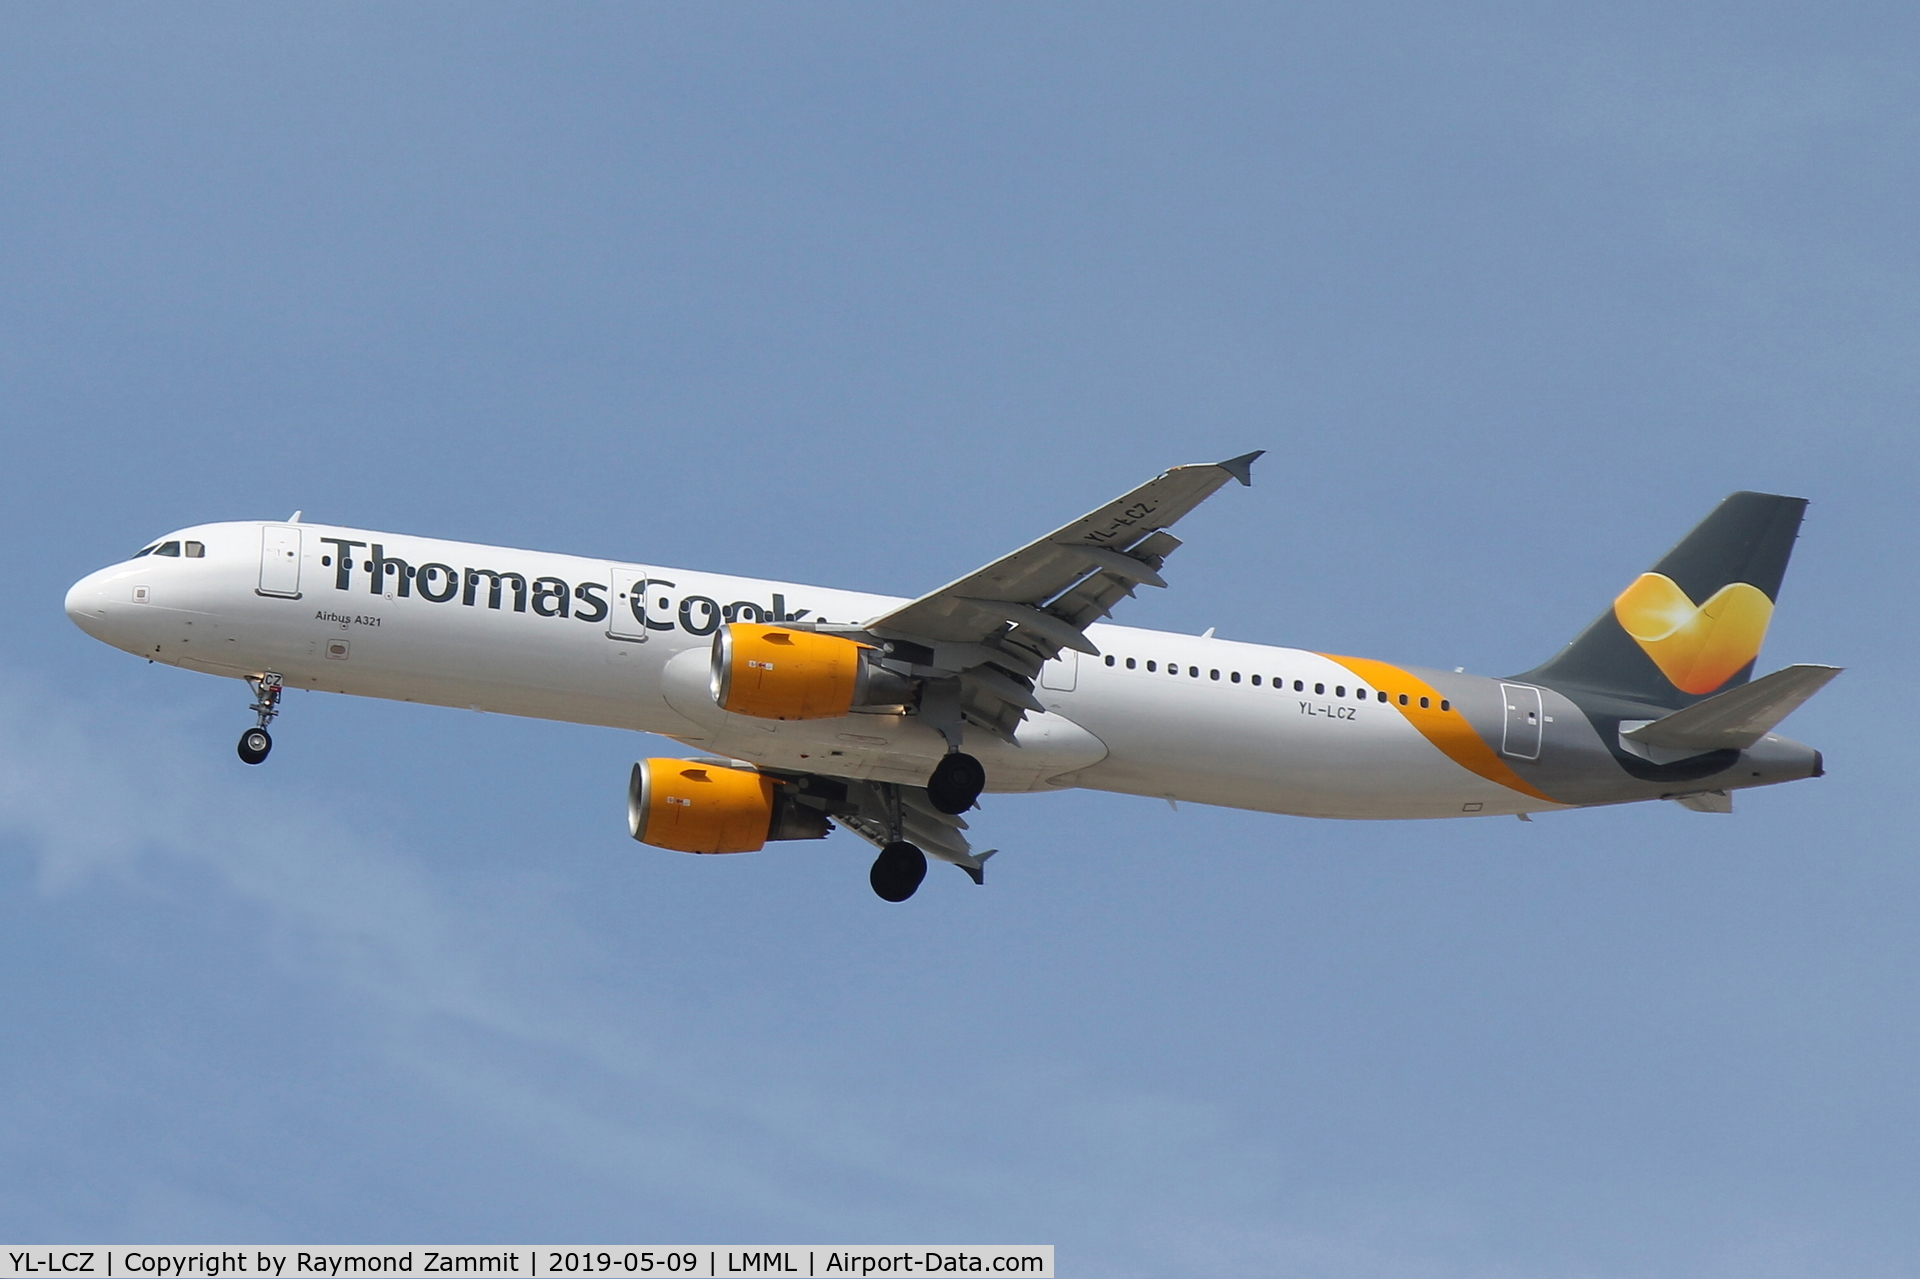 YL-LCZ, 2006 Airbus A321-211 C/N 2912, B757 YL-LCZ Thomas Cook Airlines